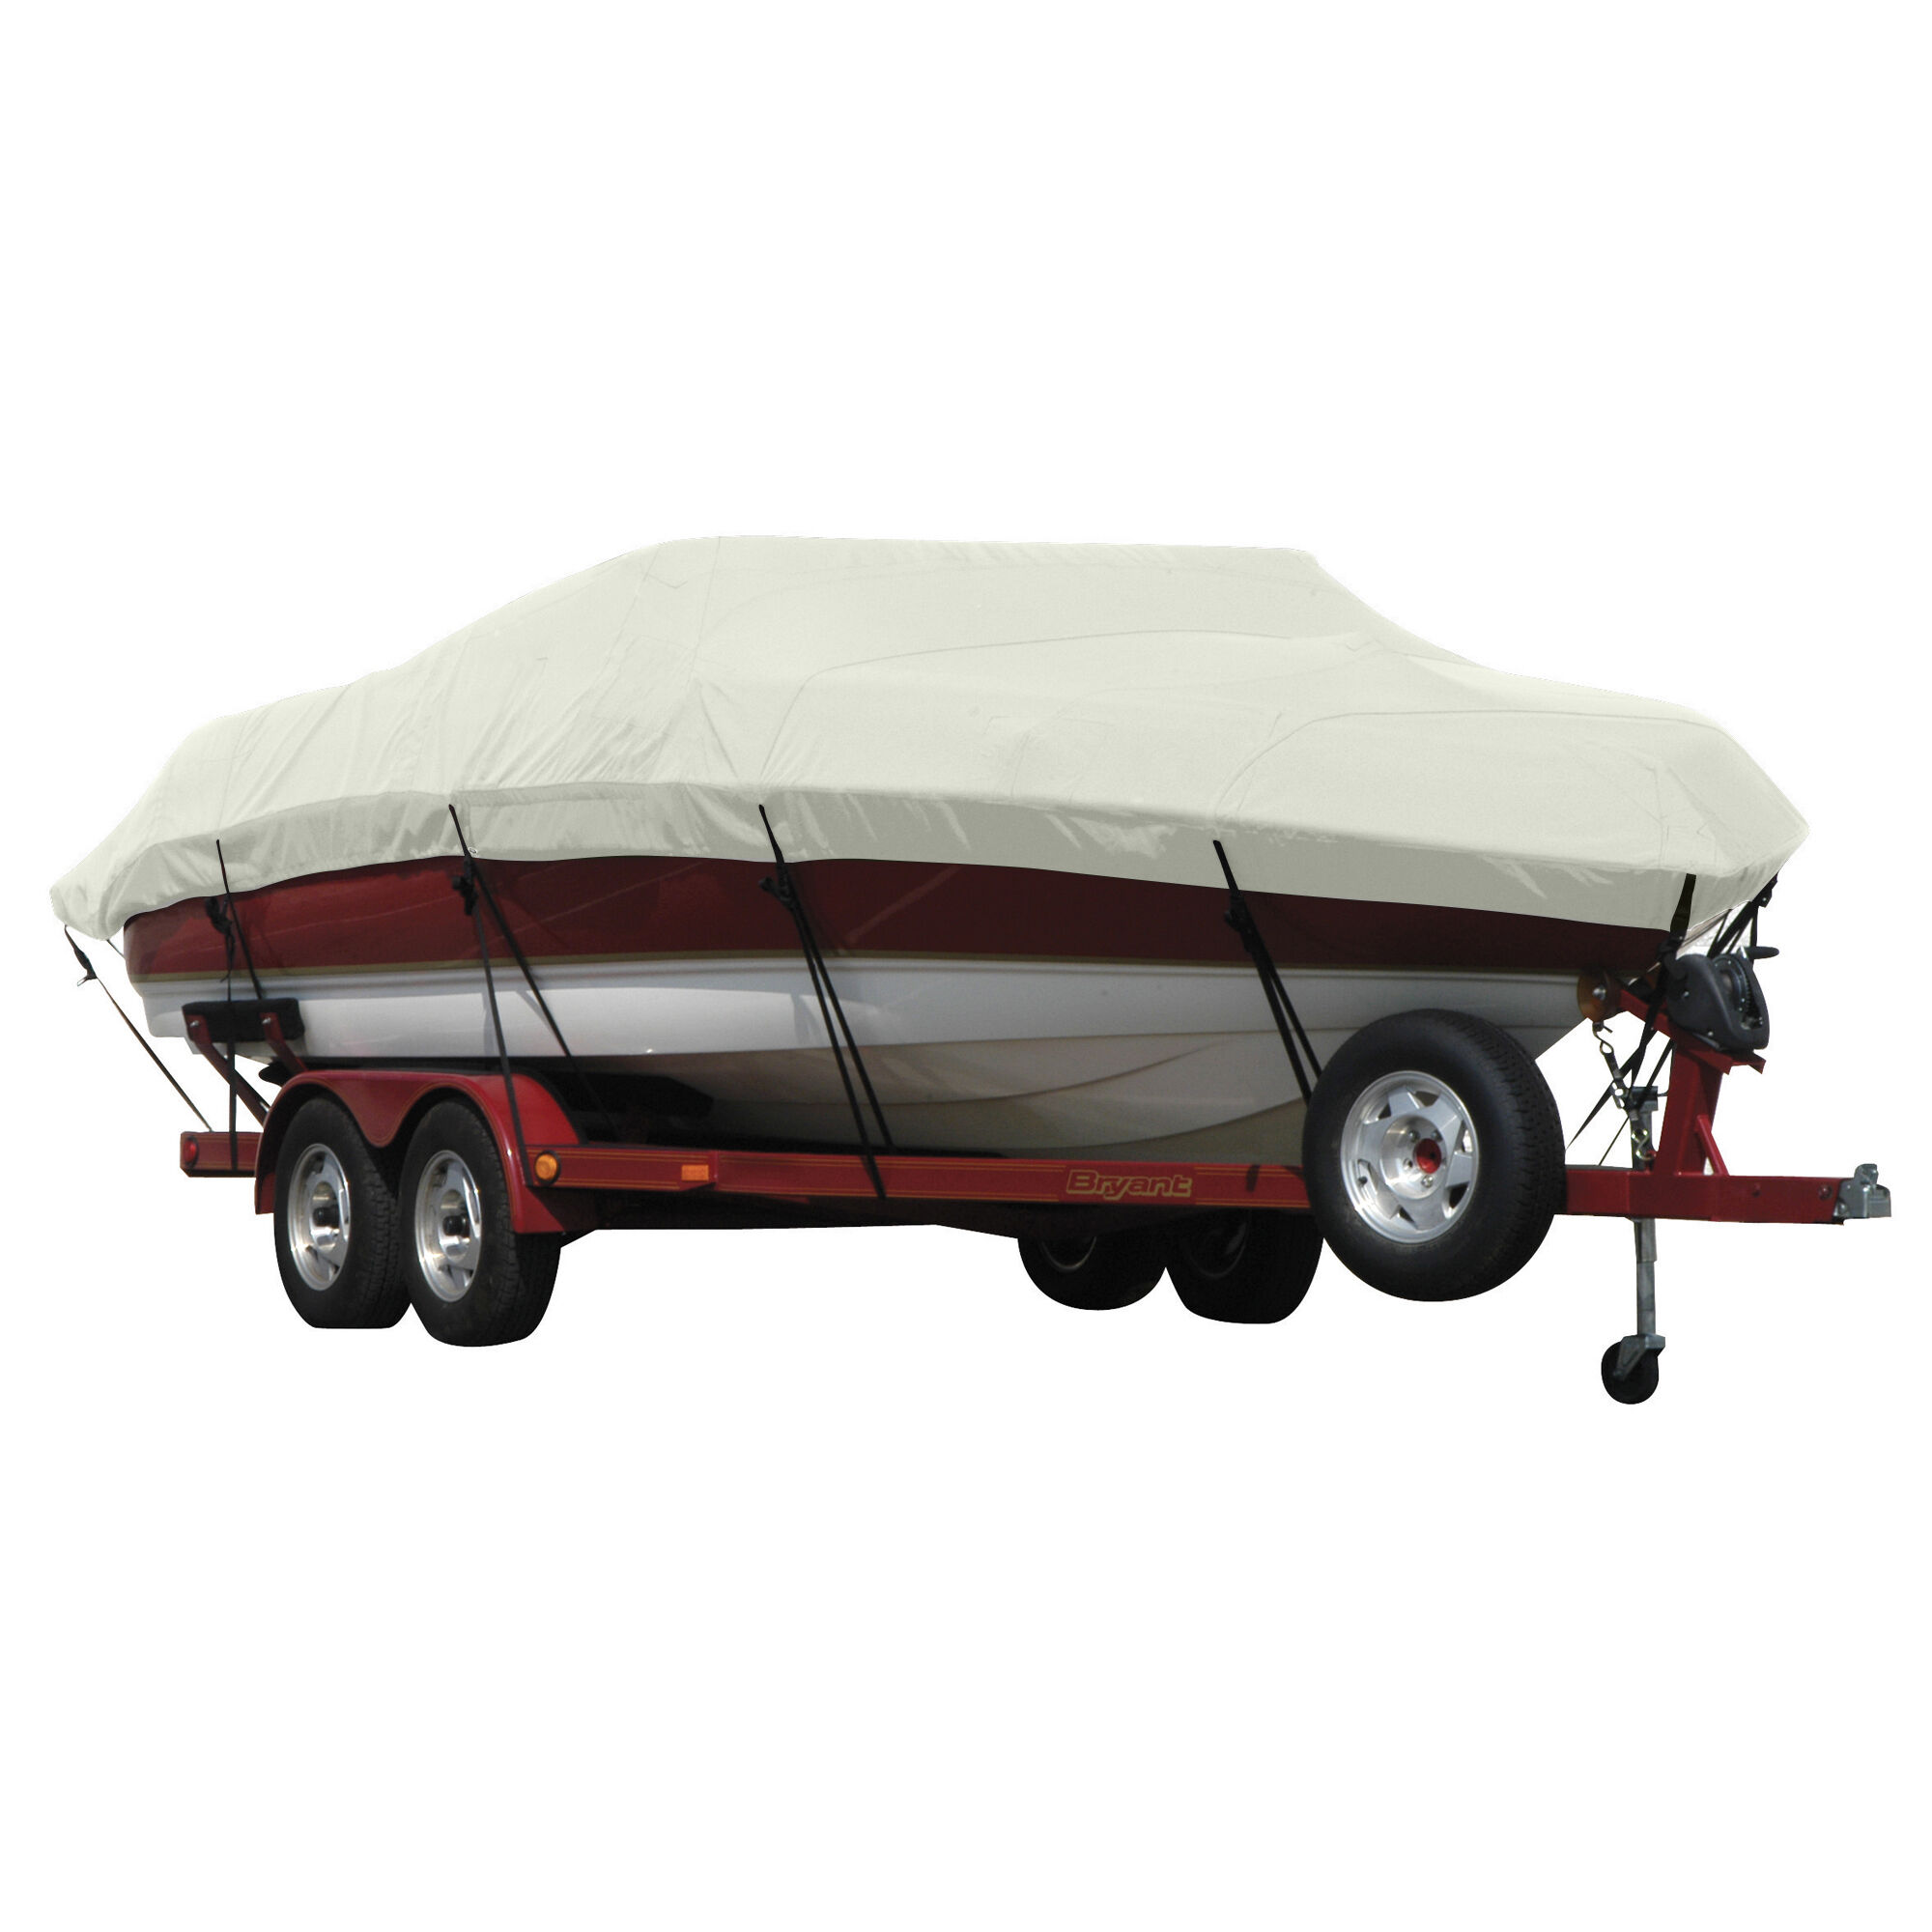 Covermate Exact Fit Sunbrella Boat Cover for Bayliner Classic 192 Ey Classic 192 Ey Does Not Accommodate Strb Ladderi/O. Silver